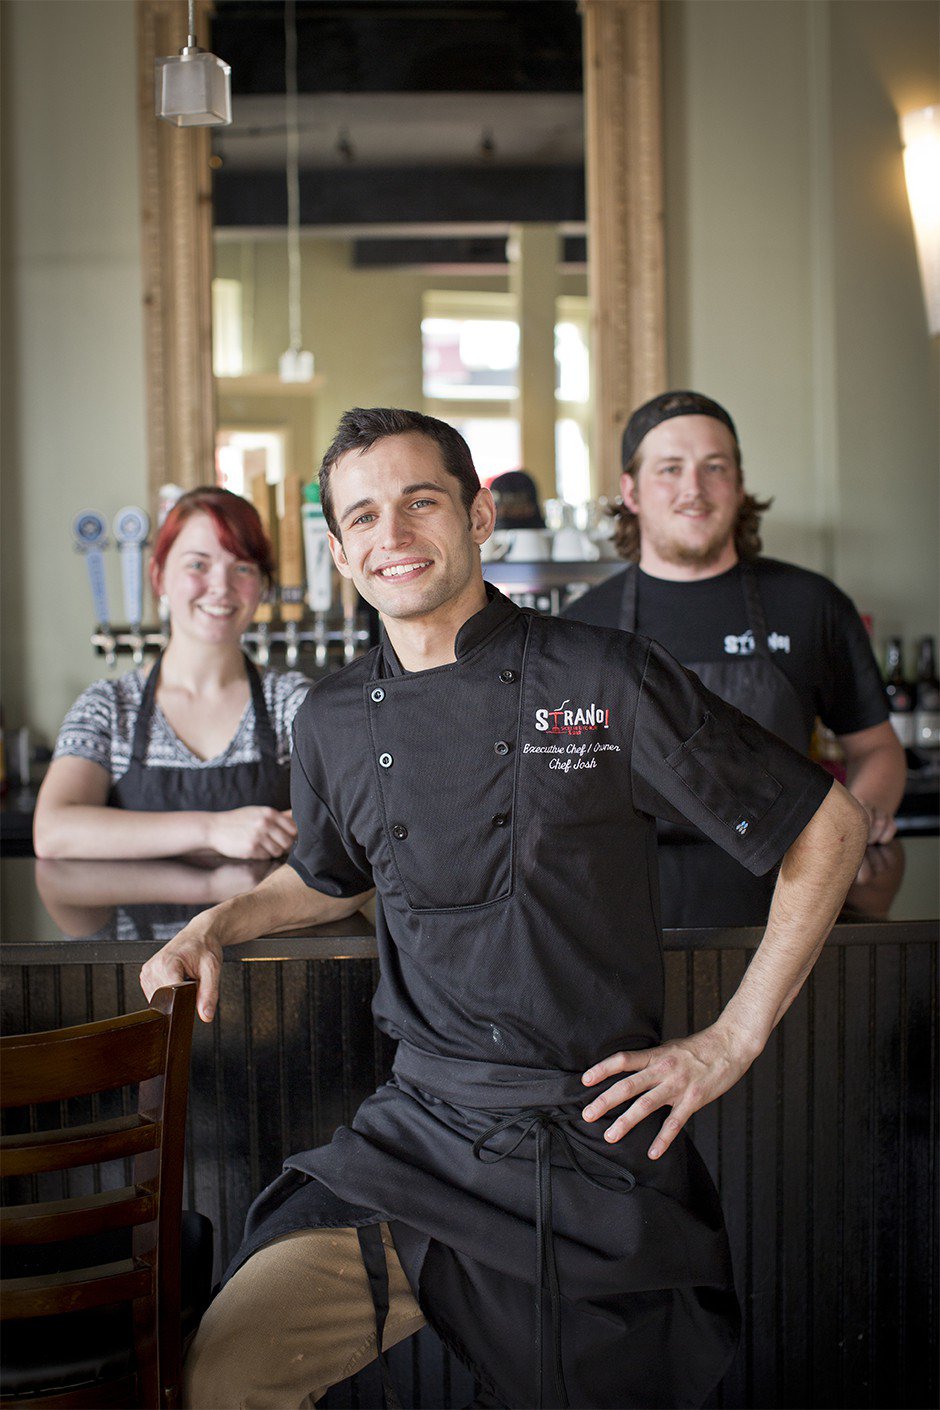 Chef/owner Josh Steiner, baker Emily Methvin, and sous chef Cole Owen are the kitchen team at Strano Sicilian Kitchen, serving family recipes along with updated pastas, pizzas, and seafood.